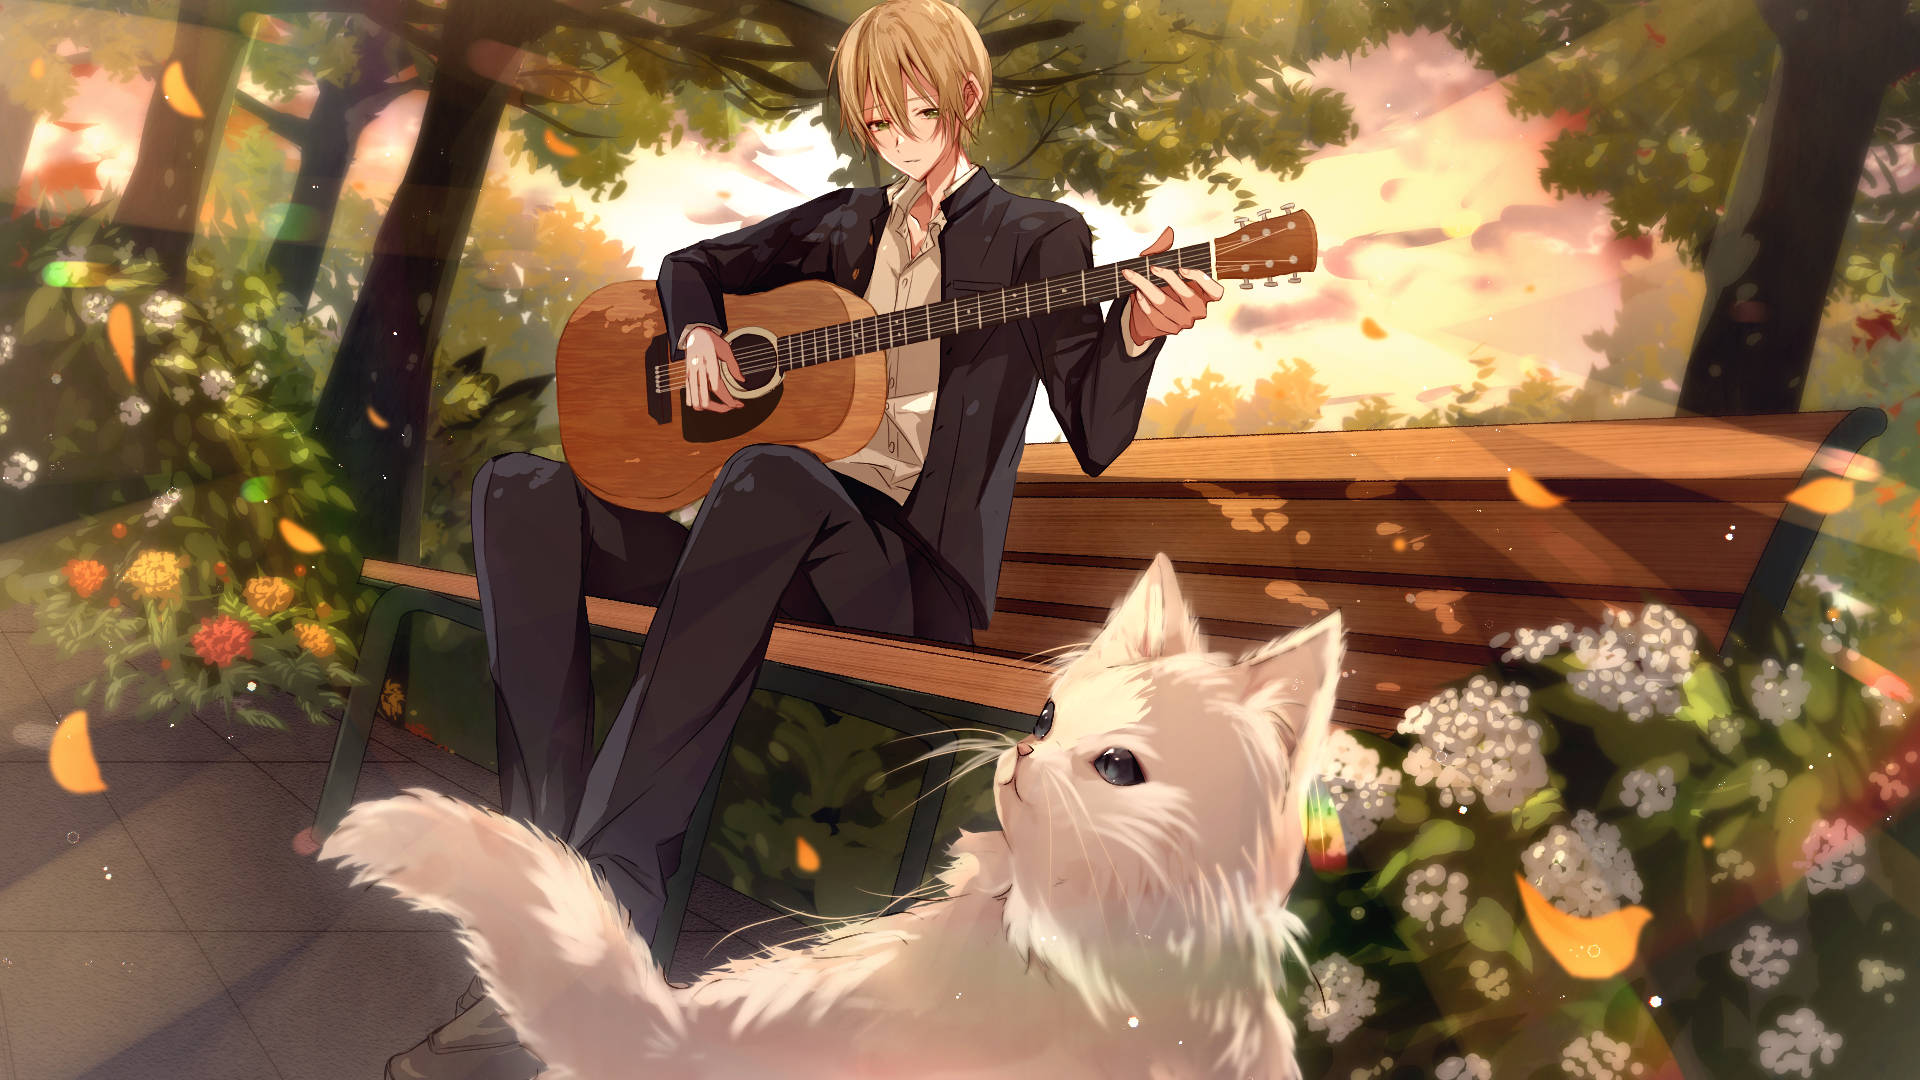 Aesthetic Anime Boy Playing Guitar Background